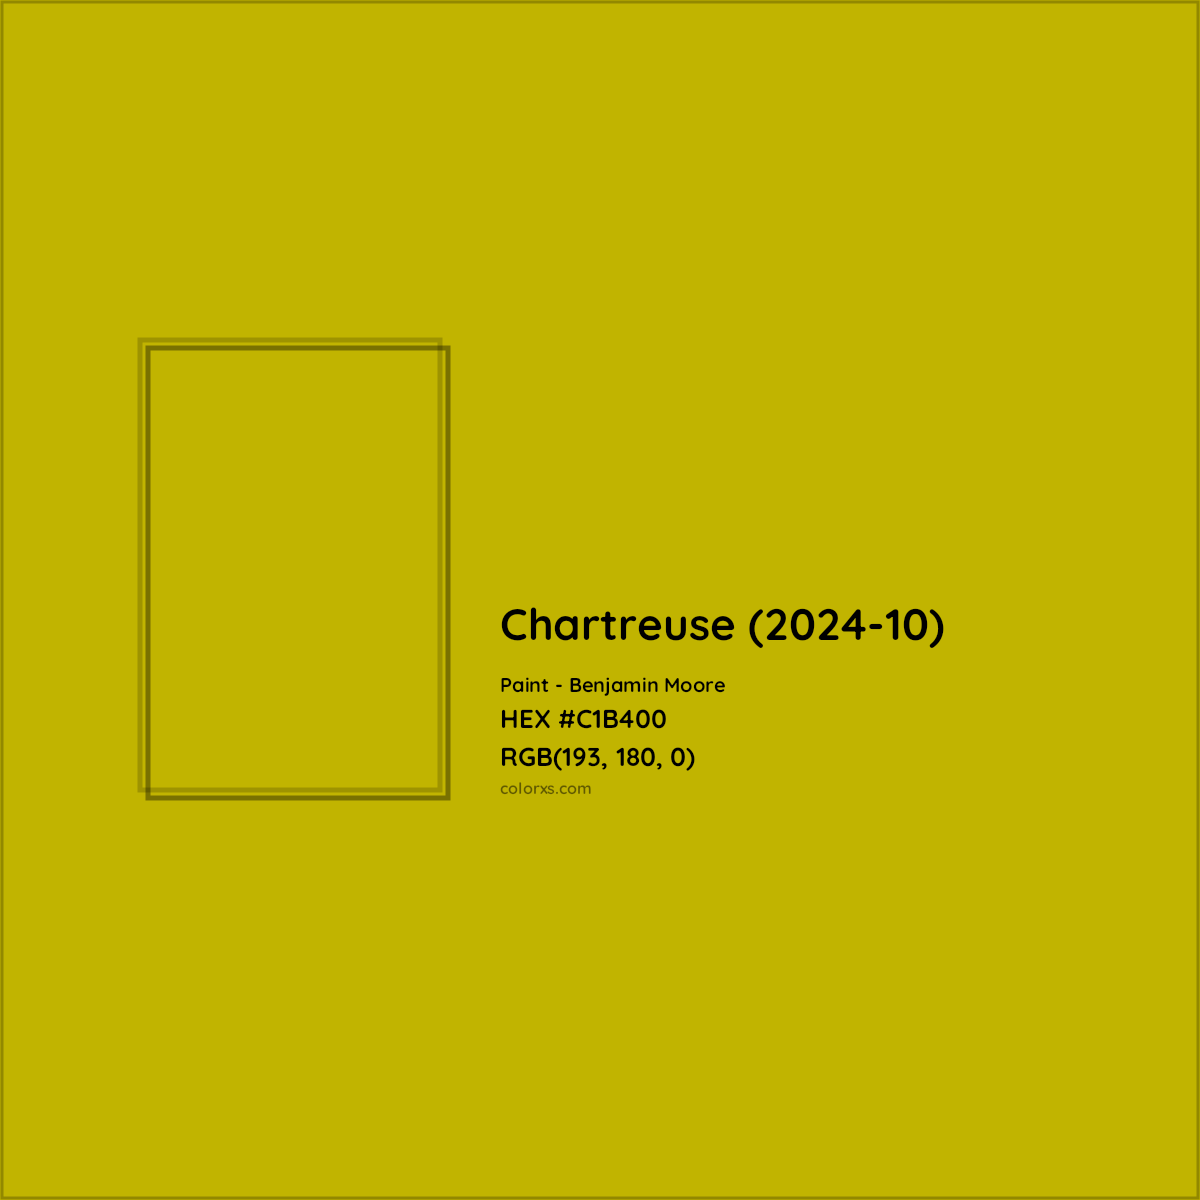 Benjamin Moore Chartreuse (202410) Paint color codes, similar paints and colors